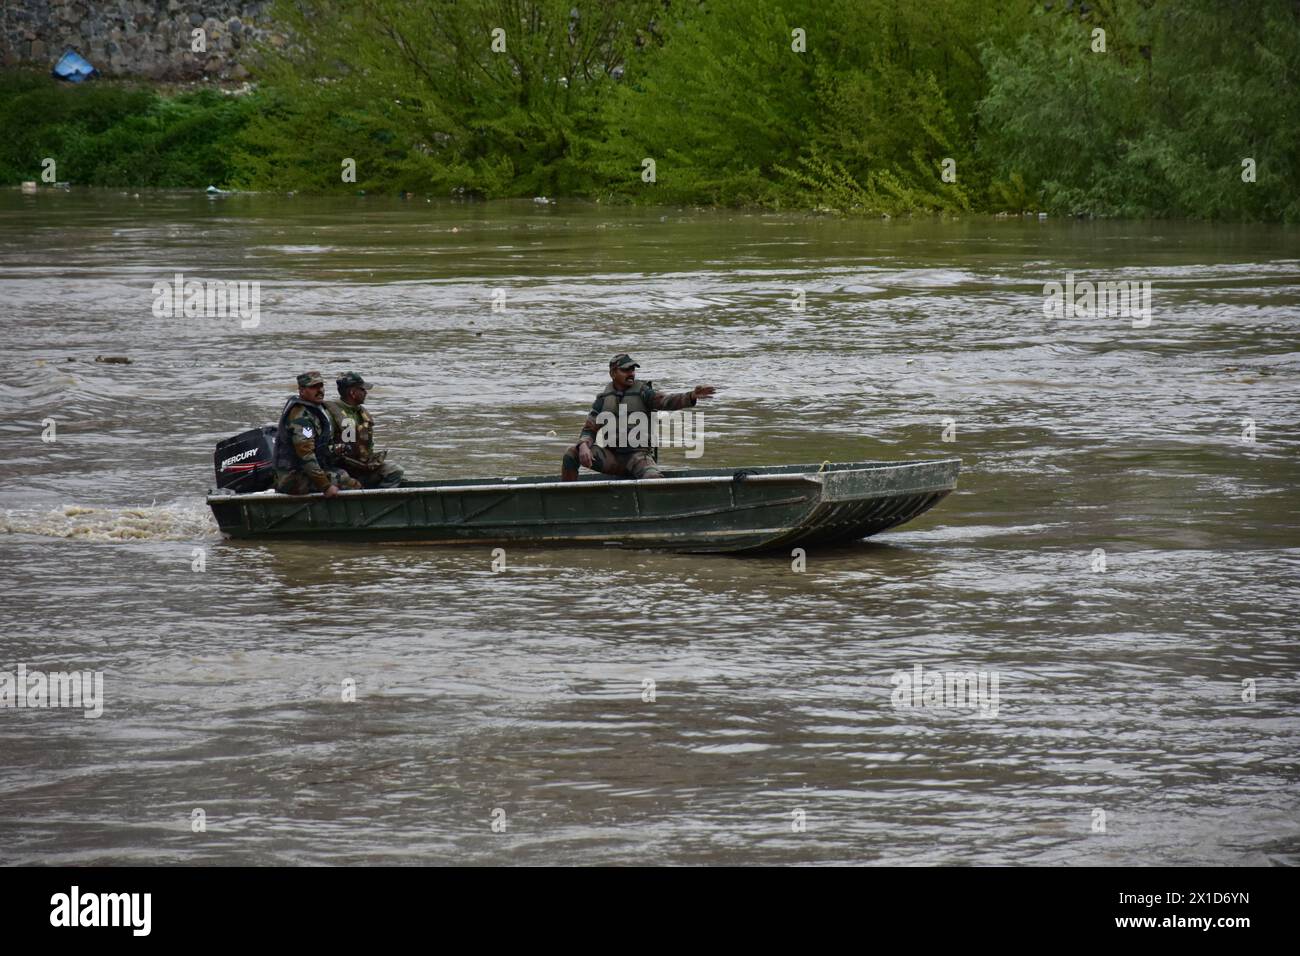 Rescuers of the Indian army seen on a search after a boat carrying people including children capsized in Jhelum river on the outskirts of Srinagar. A boat carrying a group of people has capsized in a river, drowning six of them. Most of the passengers were children on their way to school, and rescuers are searching for the missing. Stock Photo